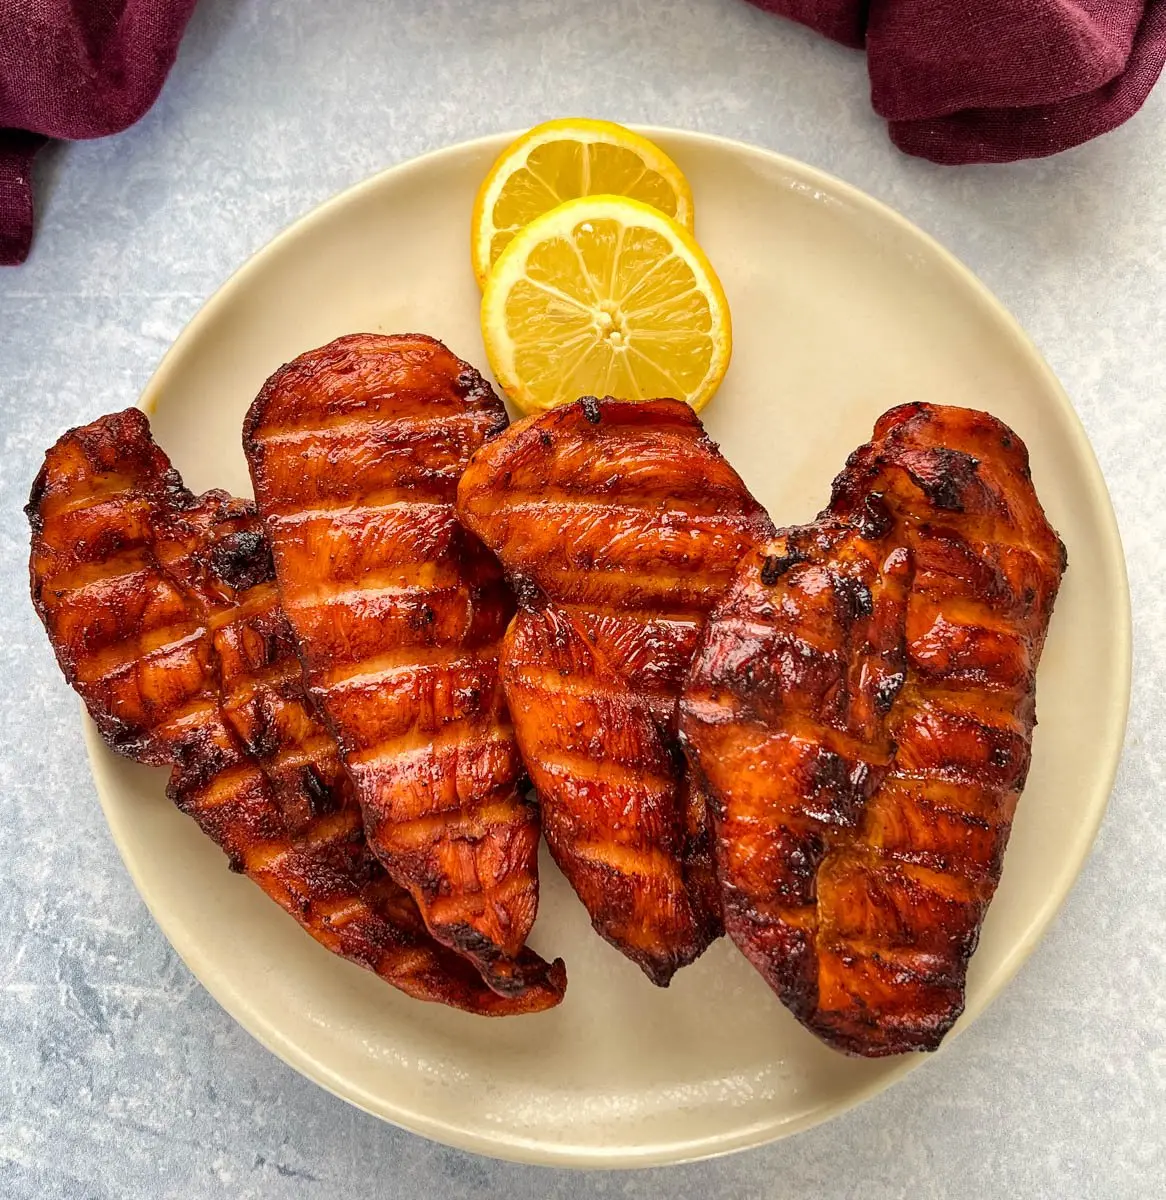 smoked chicken breast - Is smoked chicken breast already cooked